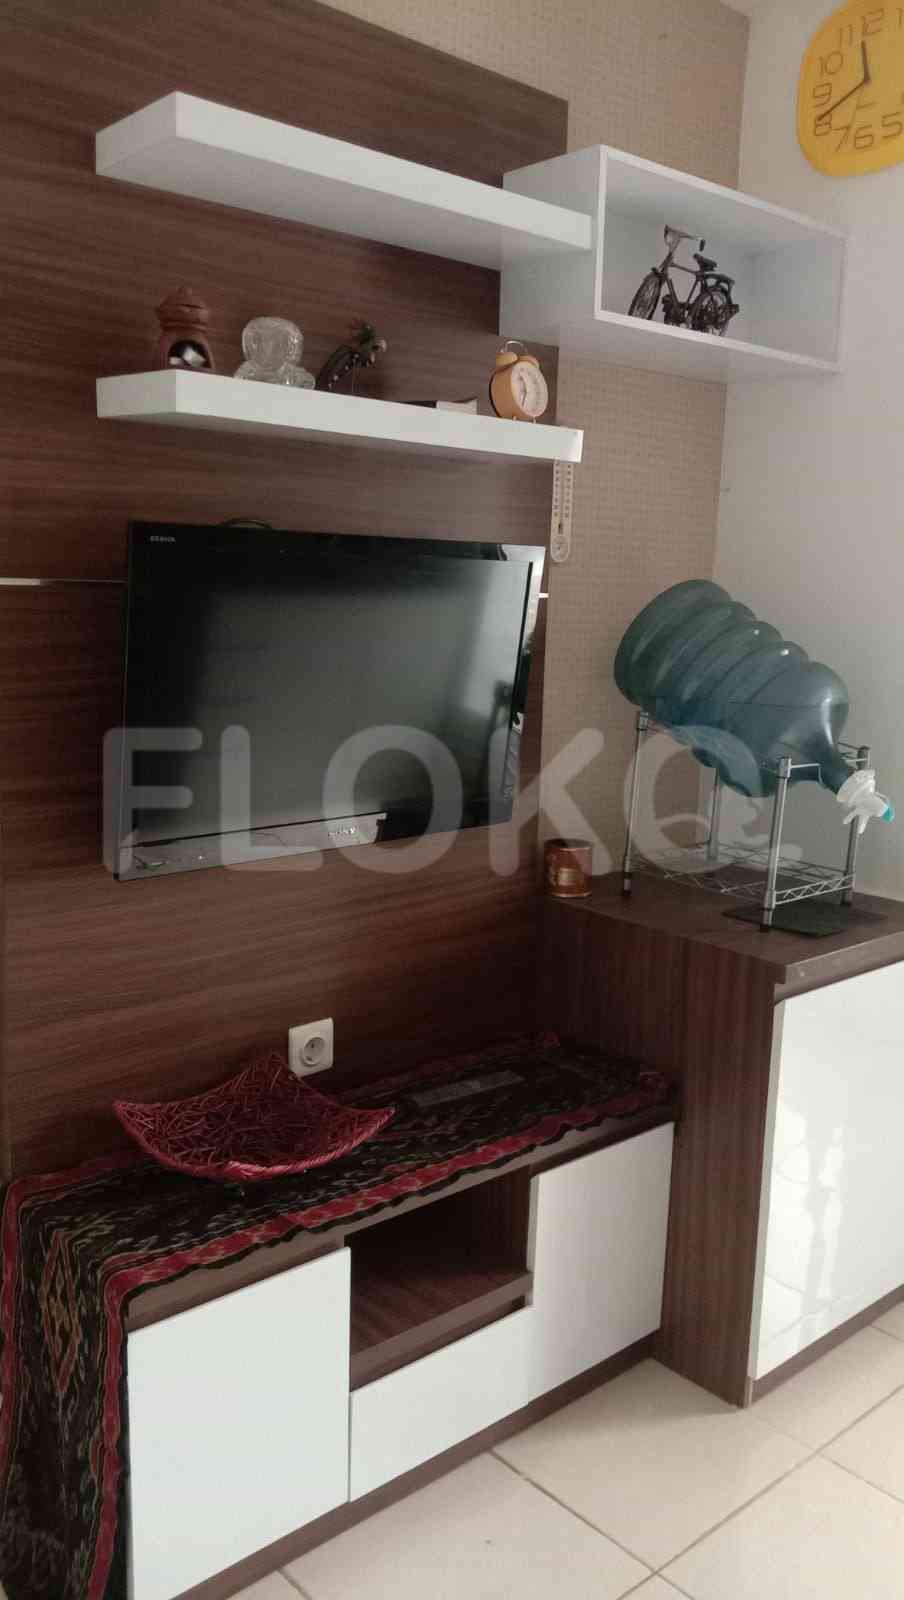 2 Bedroom on 9th Floor for Rent in Kalibata City Apartment - fpa23a 1